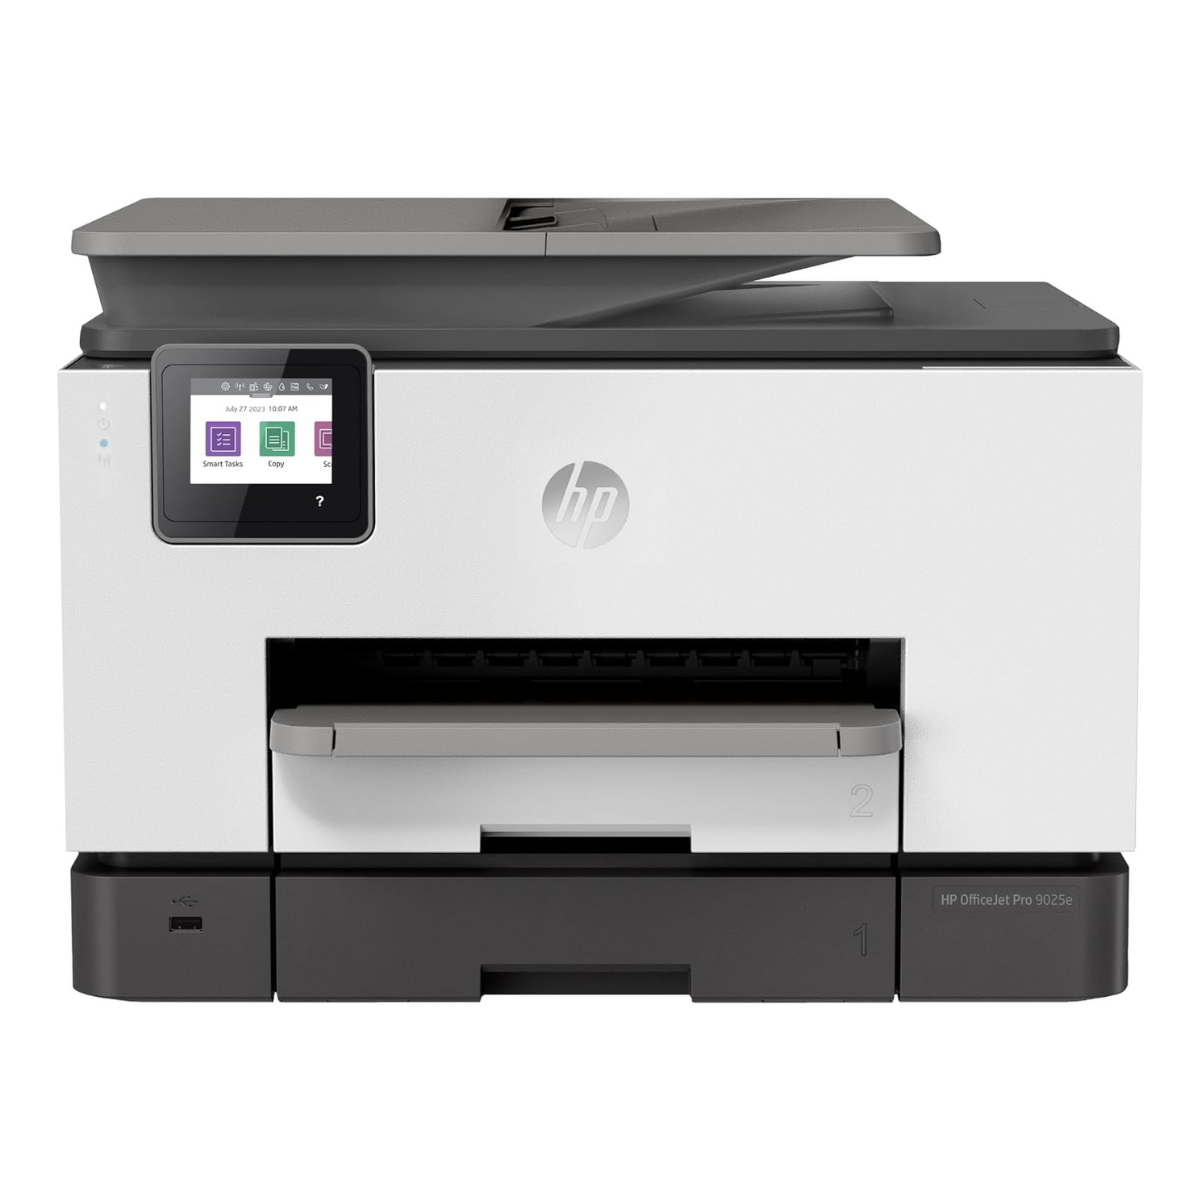 The HP OfficeJet Pro 9025e All-in-One Printer